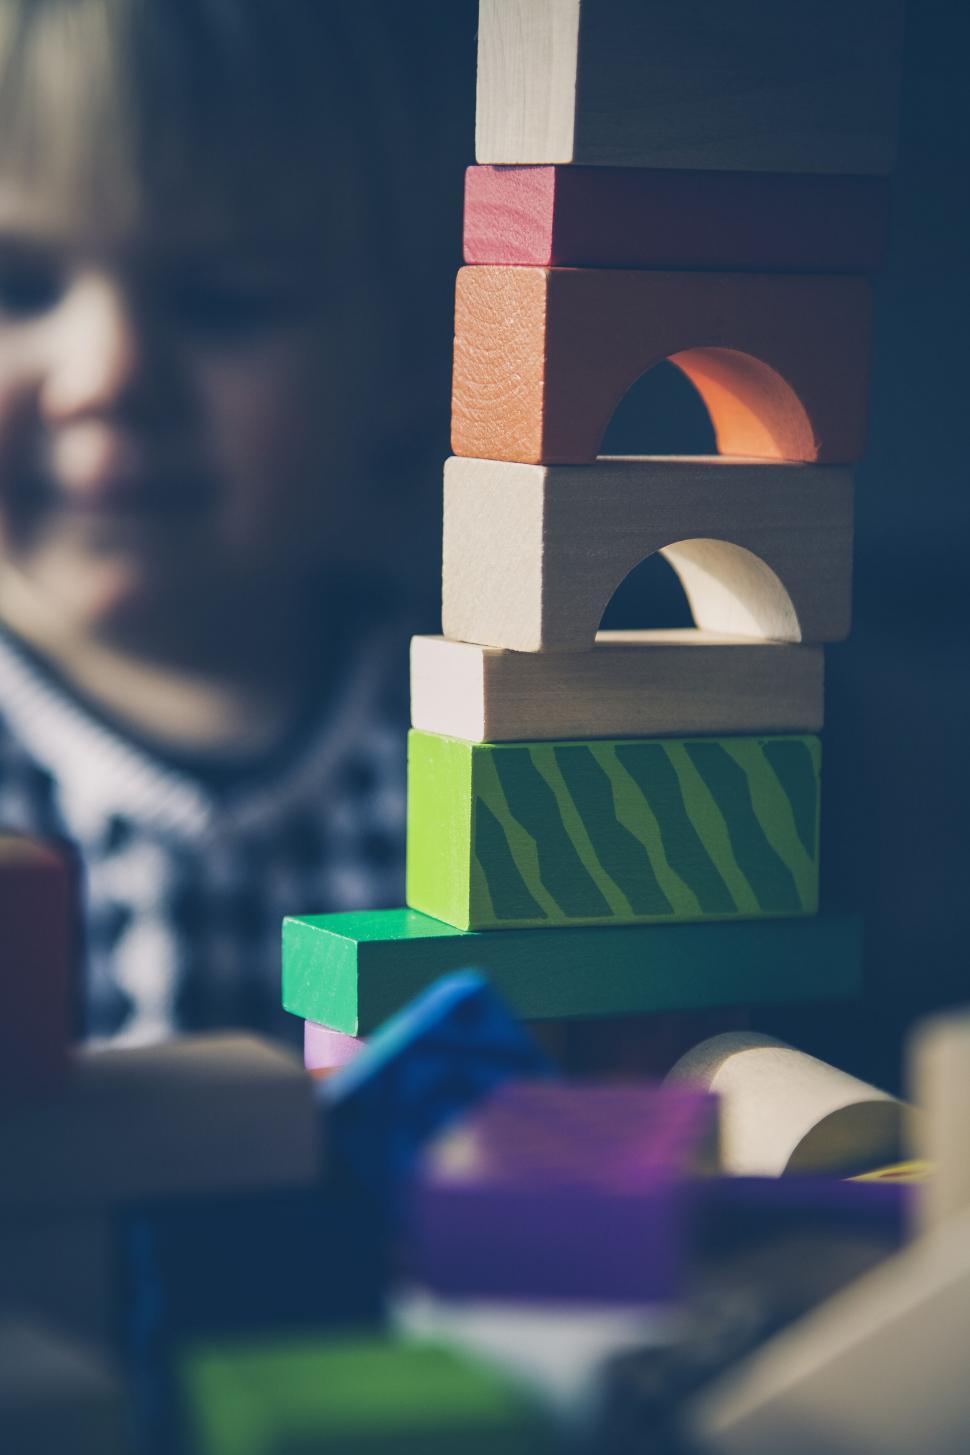 Free Image of Colorful wooden toy blocks in focus 